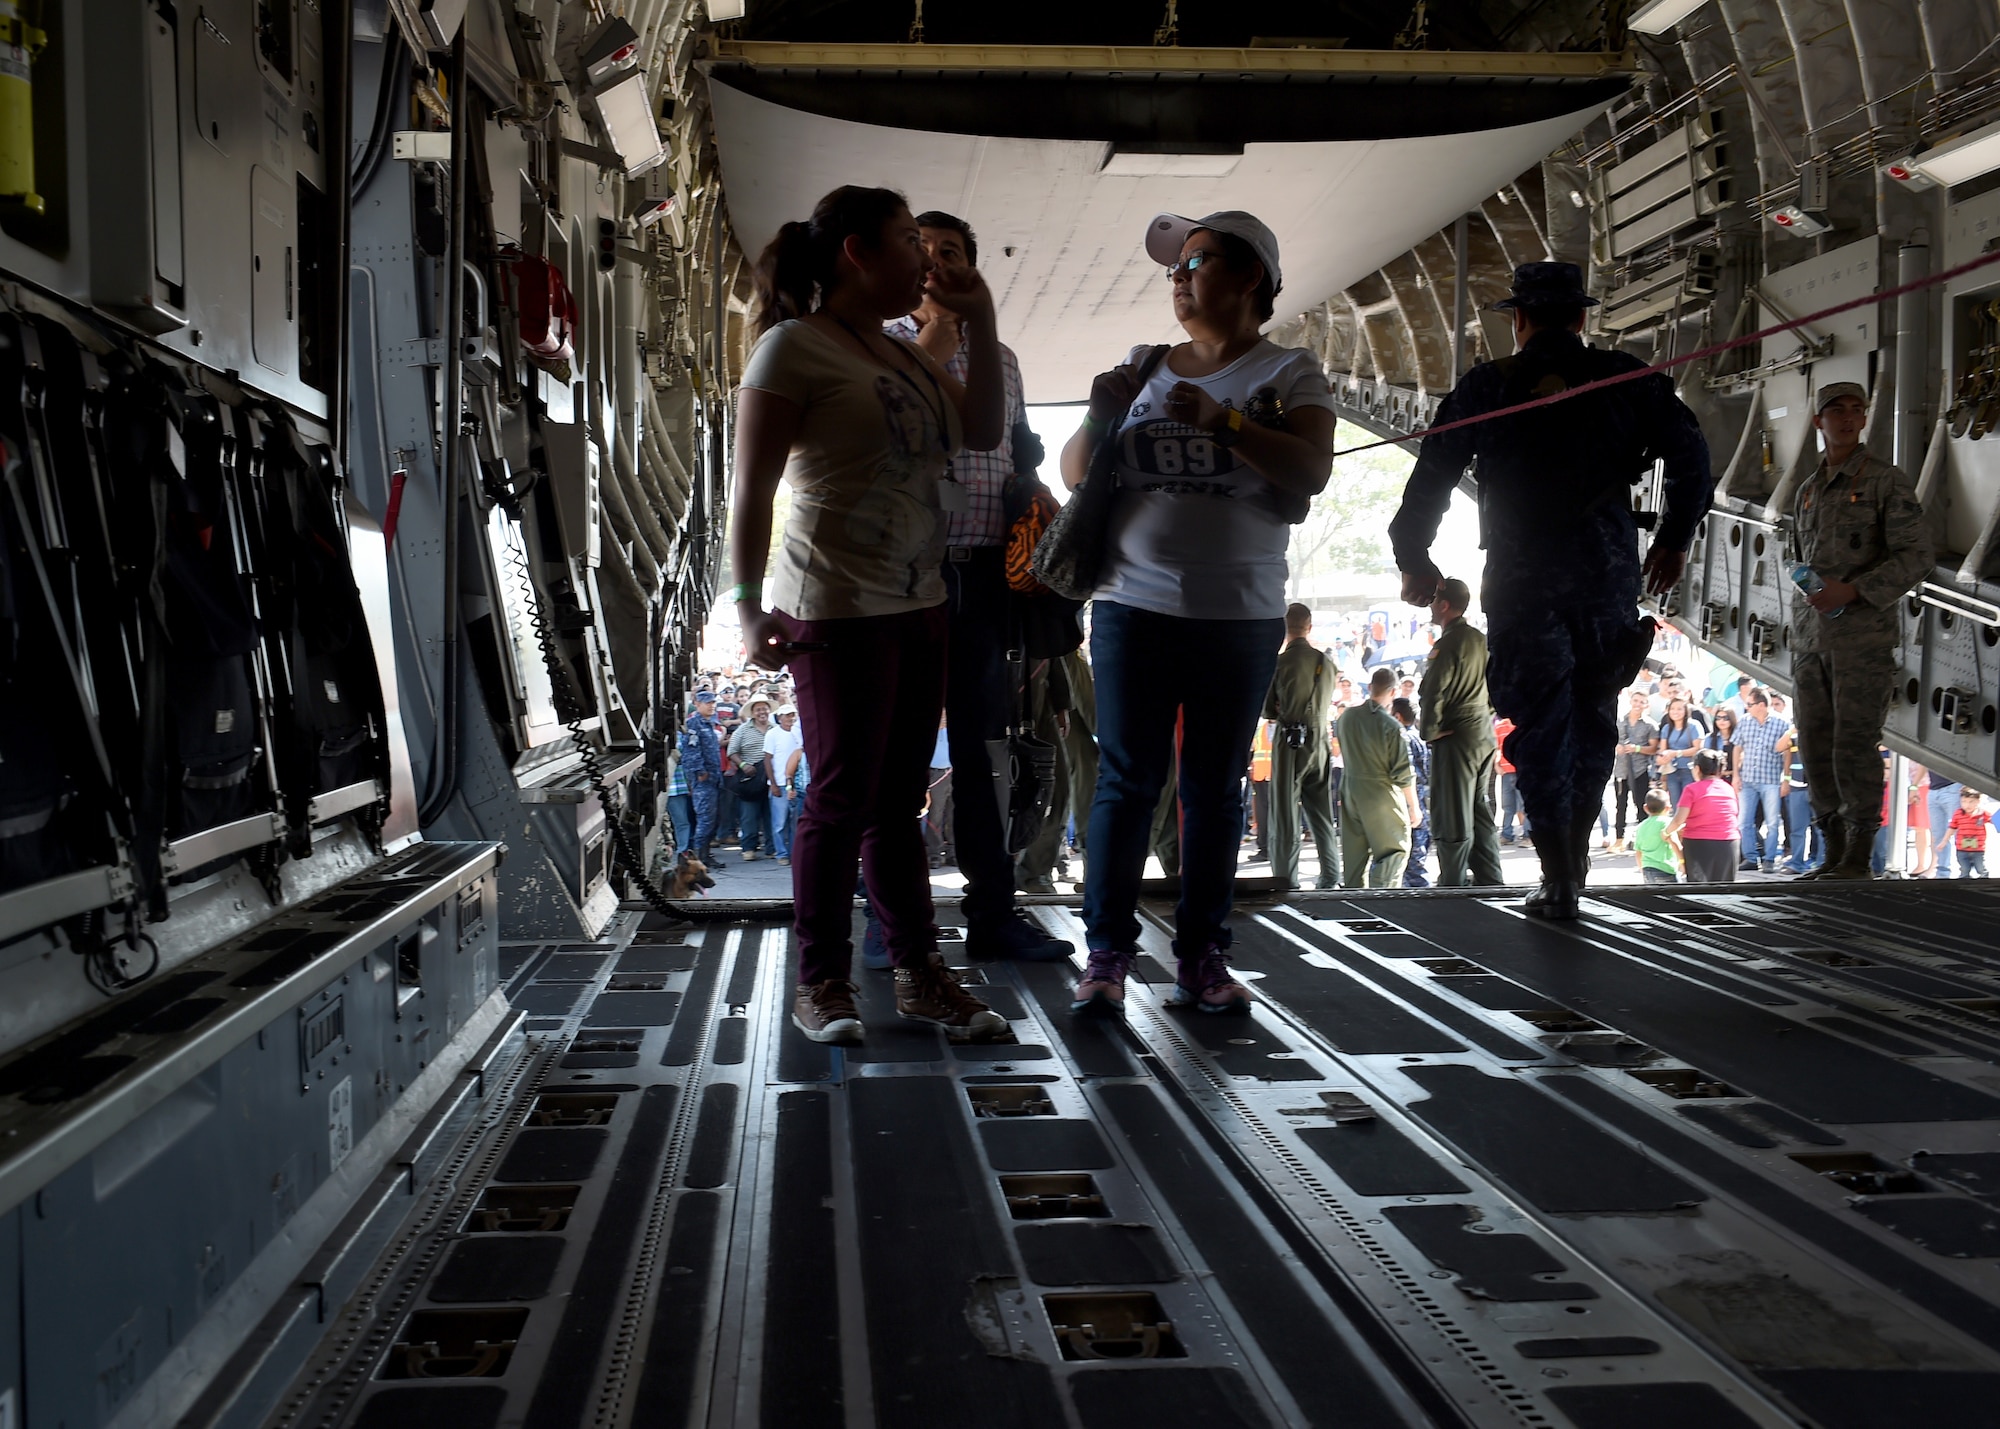 Citizens of El Salvador enter as a U.S. Air Force C-17 Globemaster III cargo aircraft, 58th Airlift Squadron at Ilopango International Airport in San Salvador, El Savador, Jan. 31, during the 2016 Ilopango Airshow. The C-17 was sent from Altus Air Force Base, Okla., to foster relationships between the U.S. and El Salvador. The aircraft was setup as a static display for the attendees to view and learn about some of its capabilities. (U.S. Air Force photo by Senior Airman Franklin R. Ramos/Released)